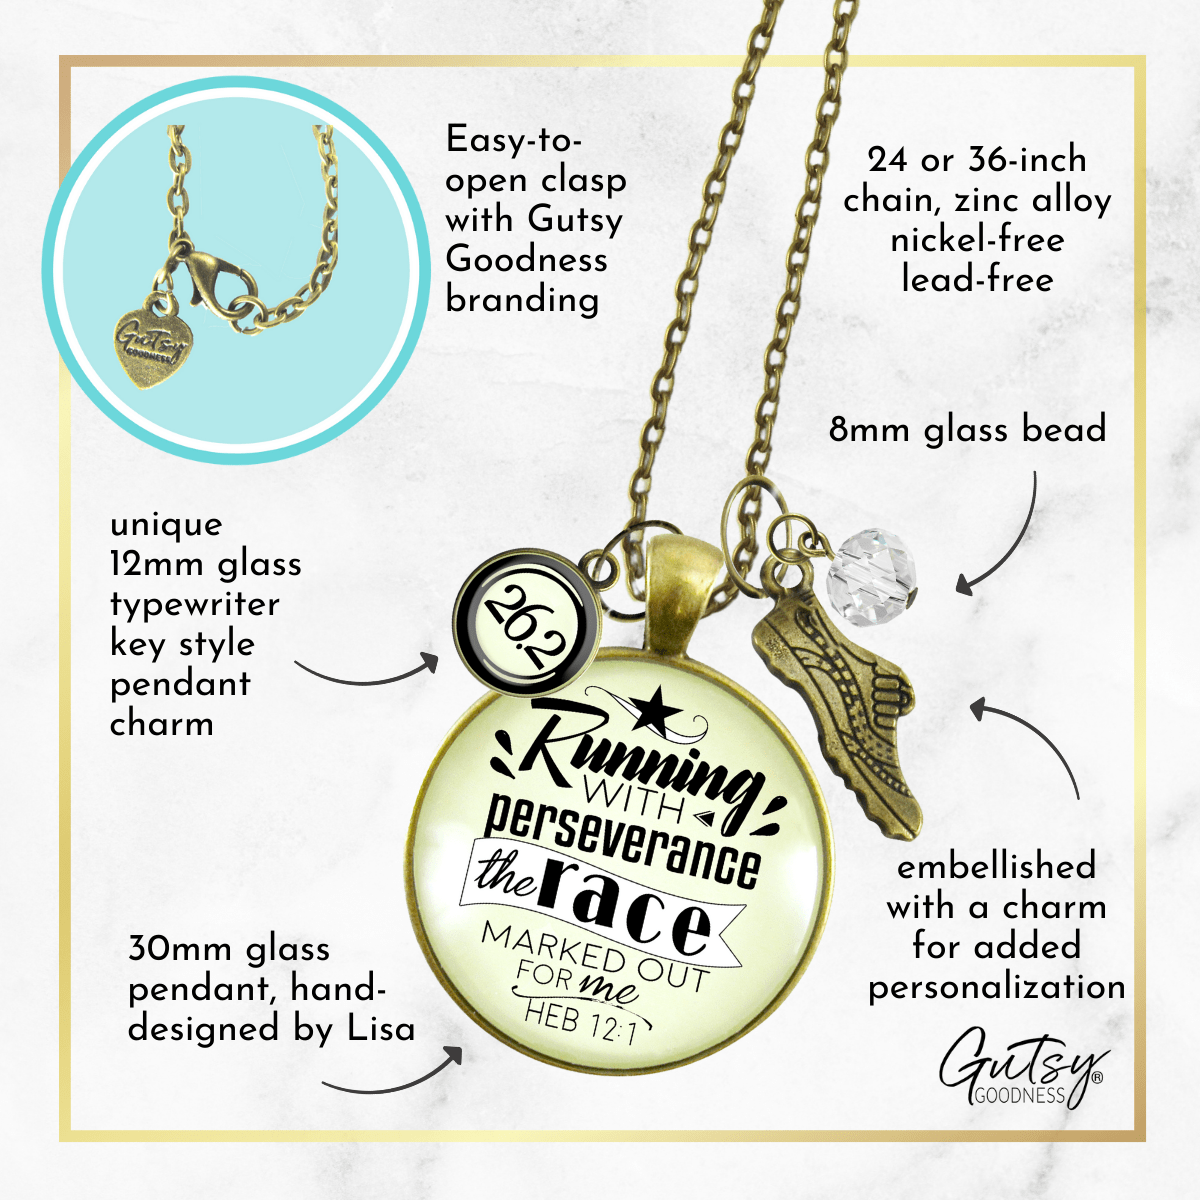 Running The Race With Perseverance 26.2 Marathon - Gutsy Goodness Handmade Jewelry Gifts